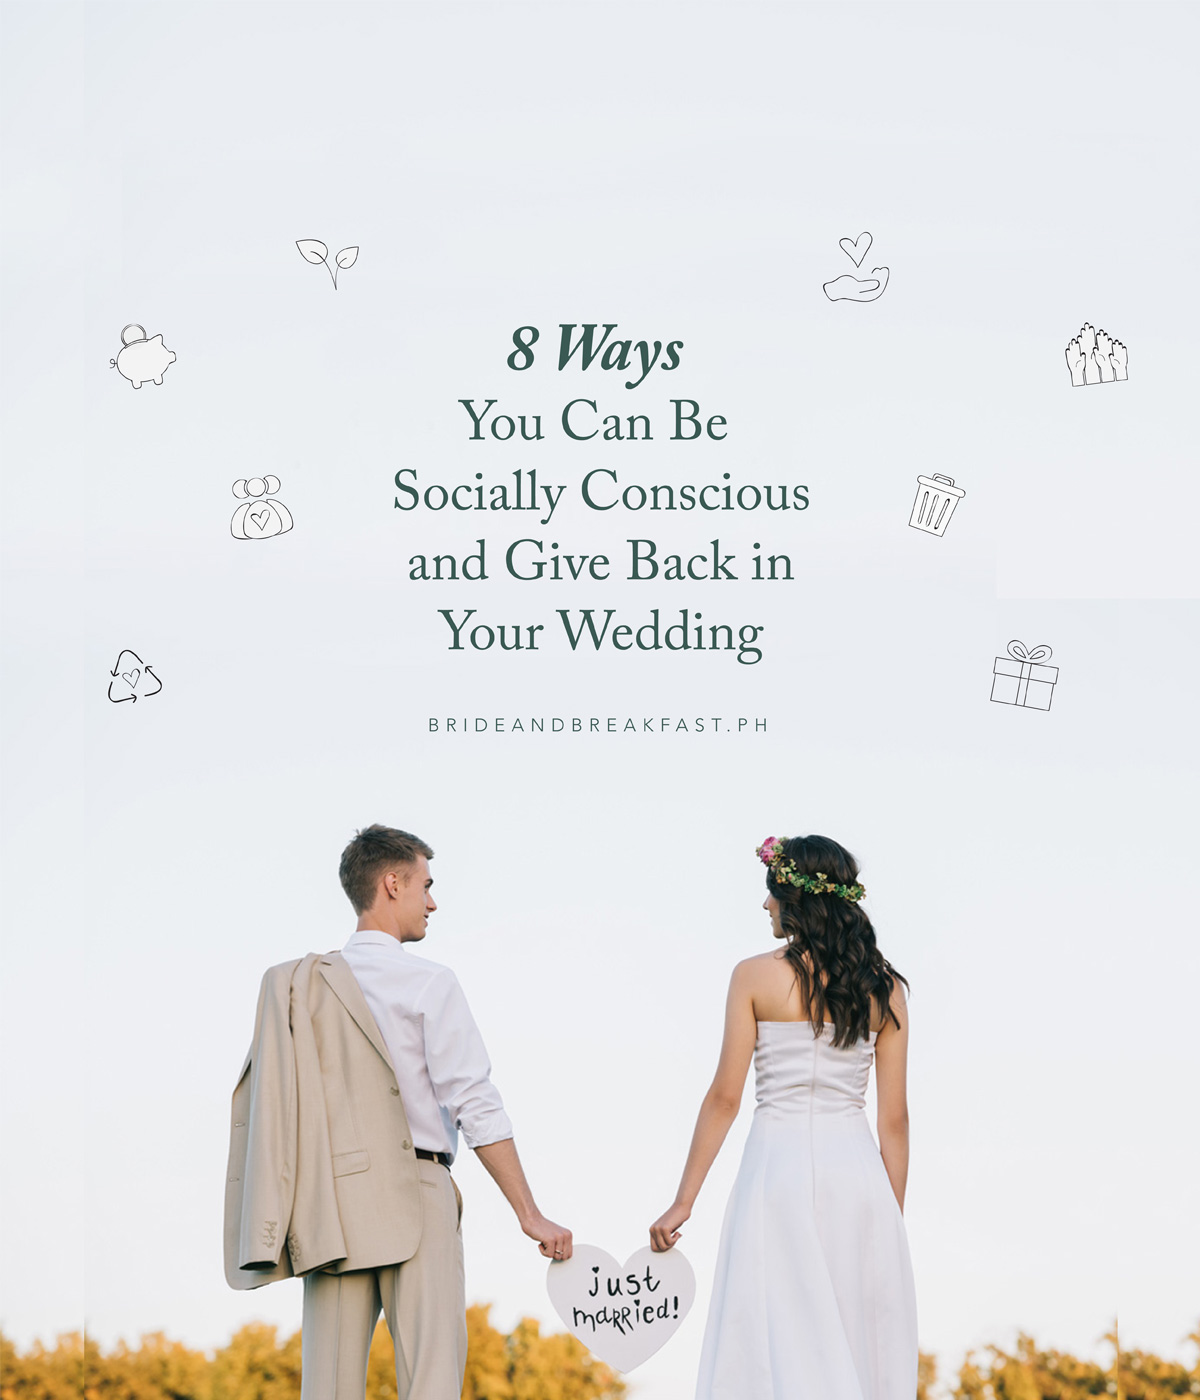 8 Ways You Can Be Socially Conscious and Give Back in Your Wedding